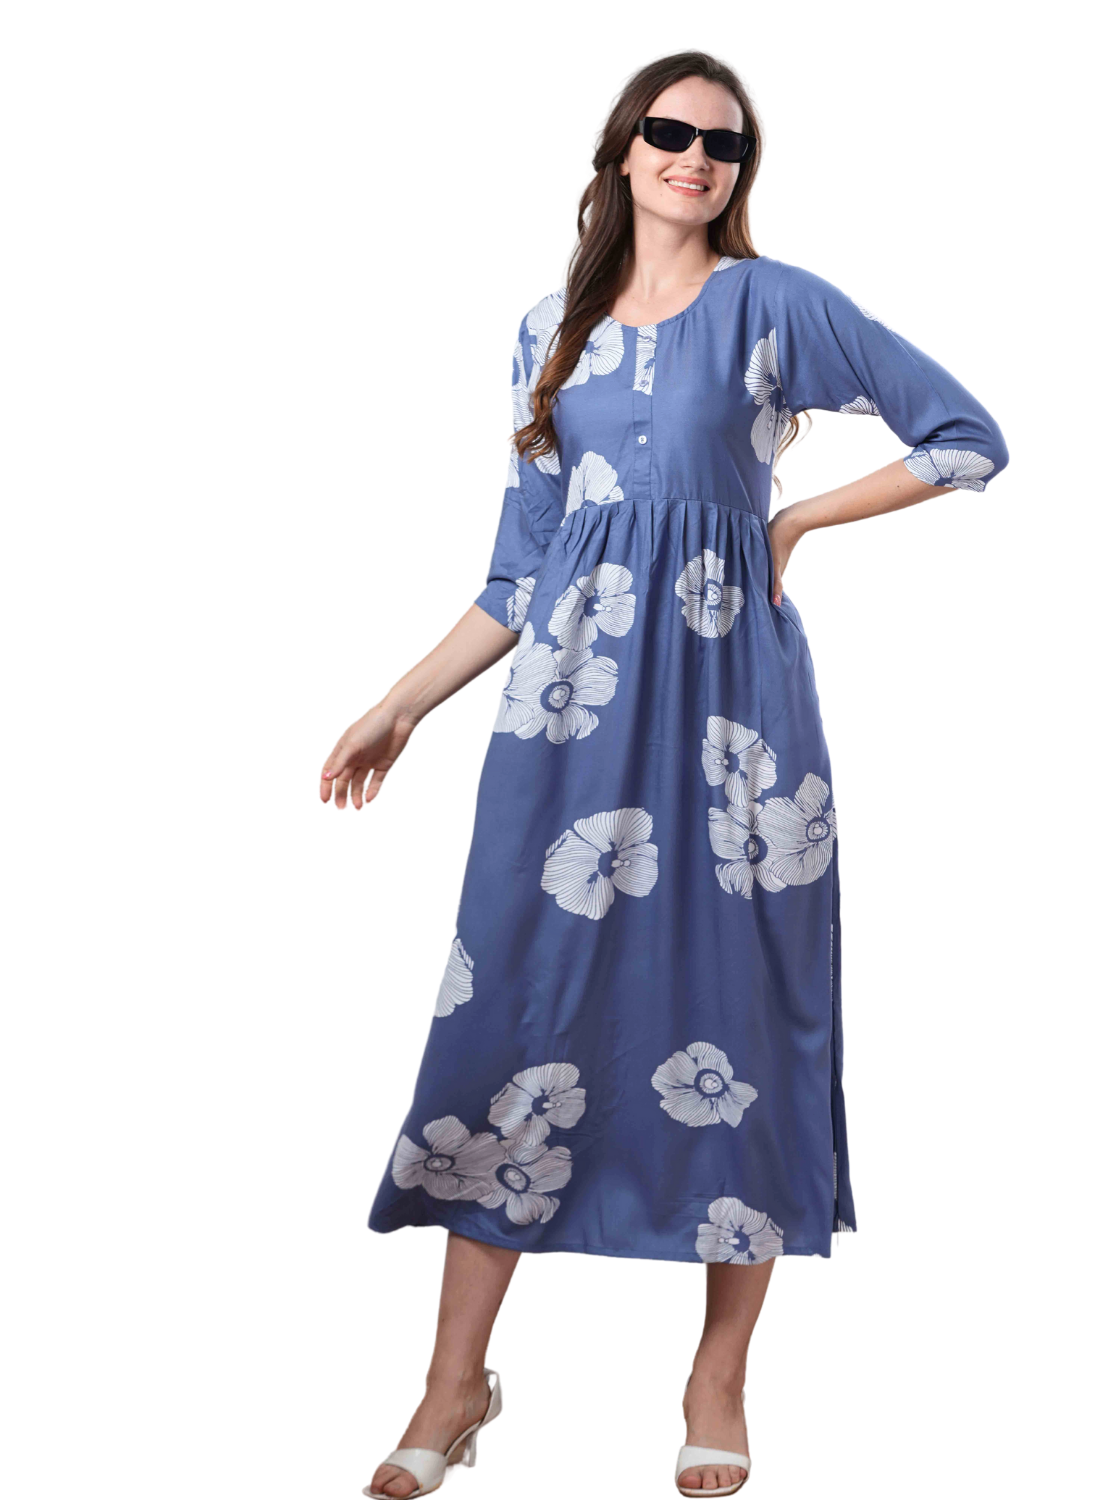 New Arrivals ONLY MINE Premium Rayon FROCK Model Pleated Nighties - Style 3/4 Length Sleeve | Soft & Smooth Cloths | Stylish Look | Perfect Nightdress for Trendy Women's